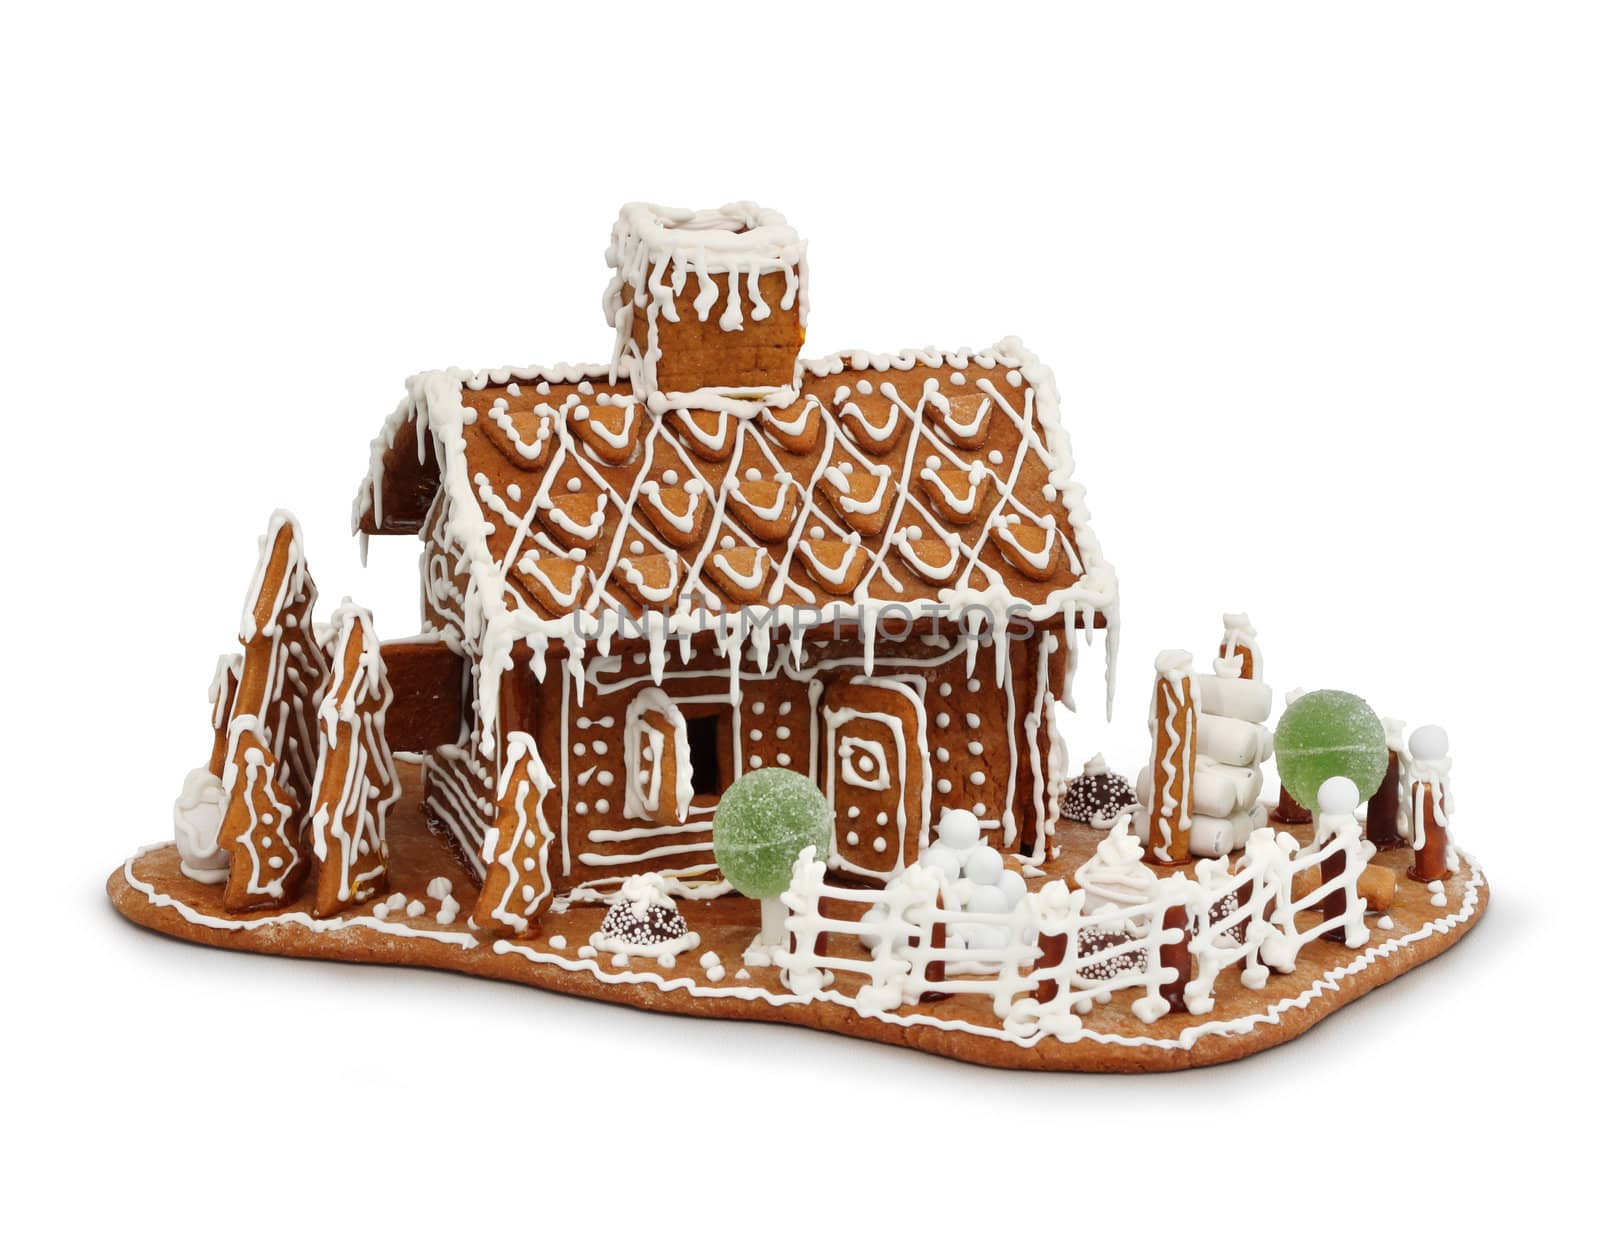 Homemade gingerbread house cottage isolated on white